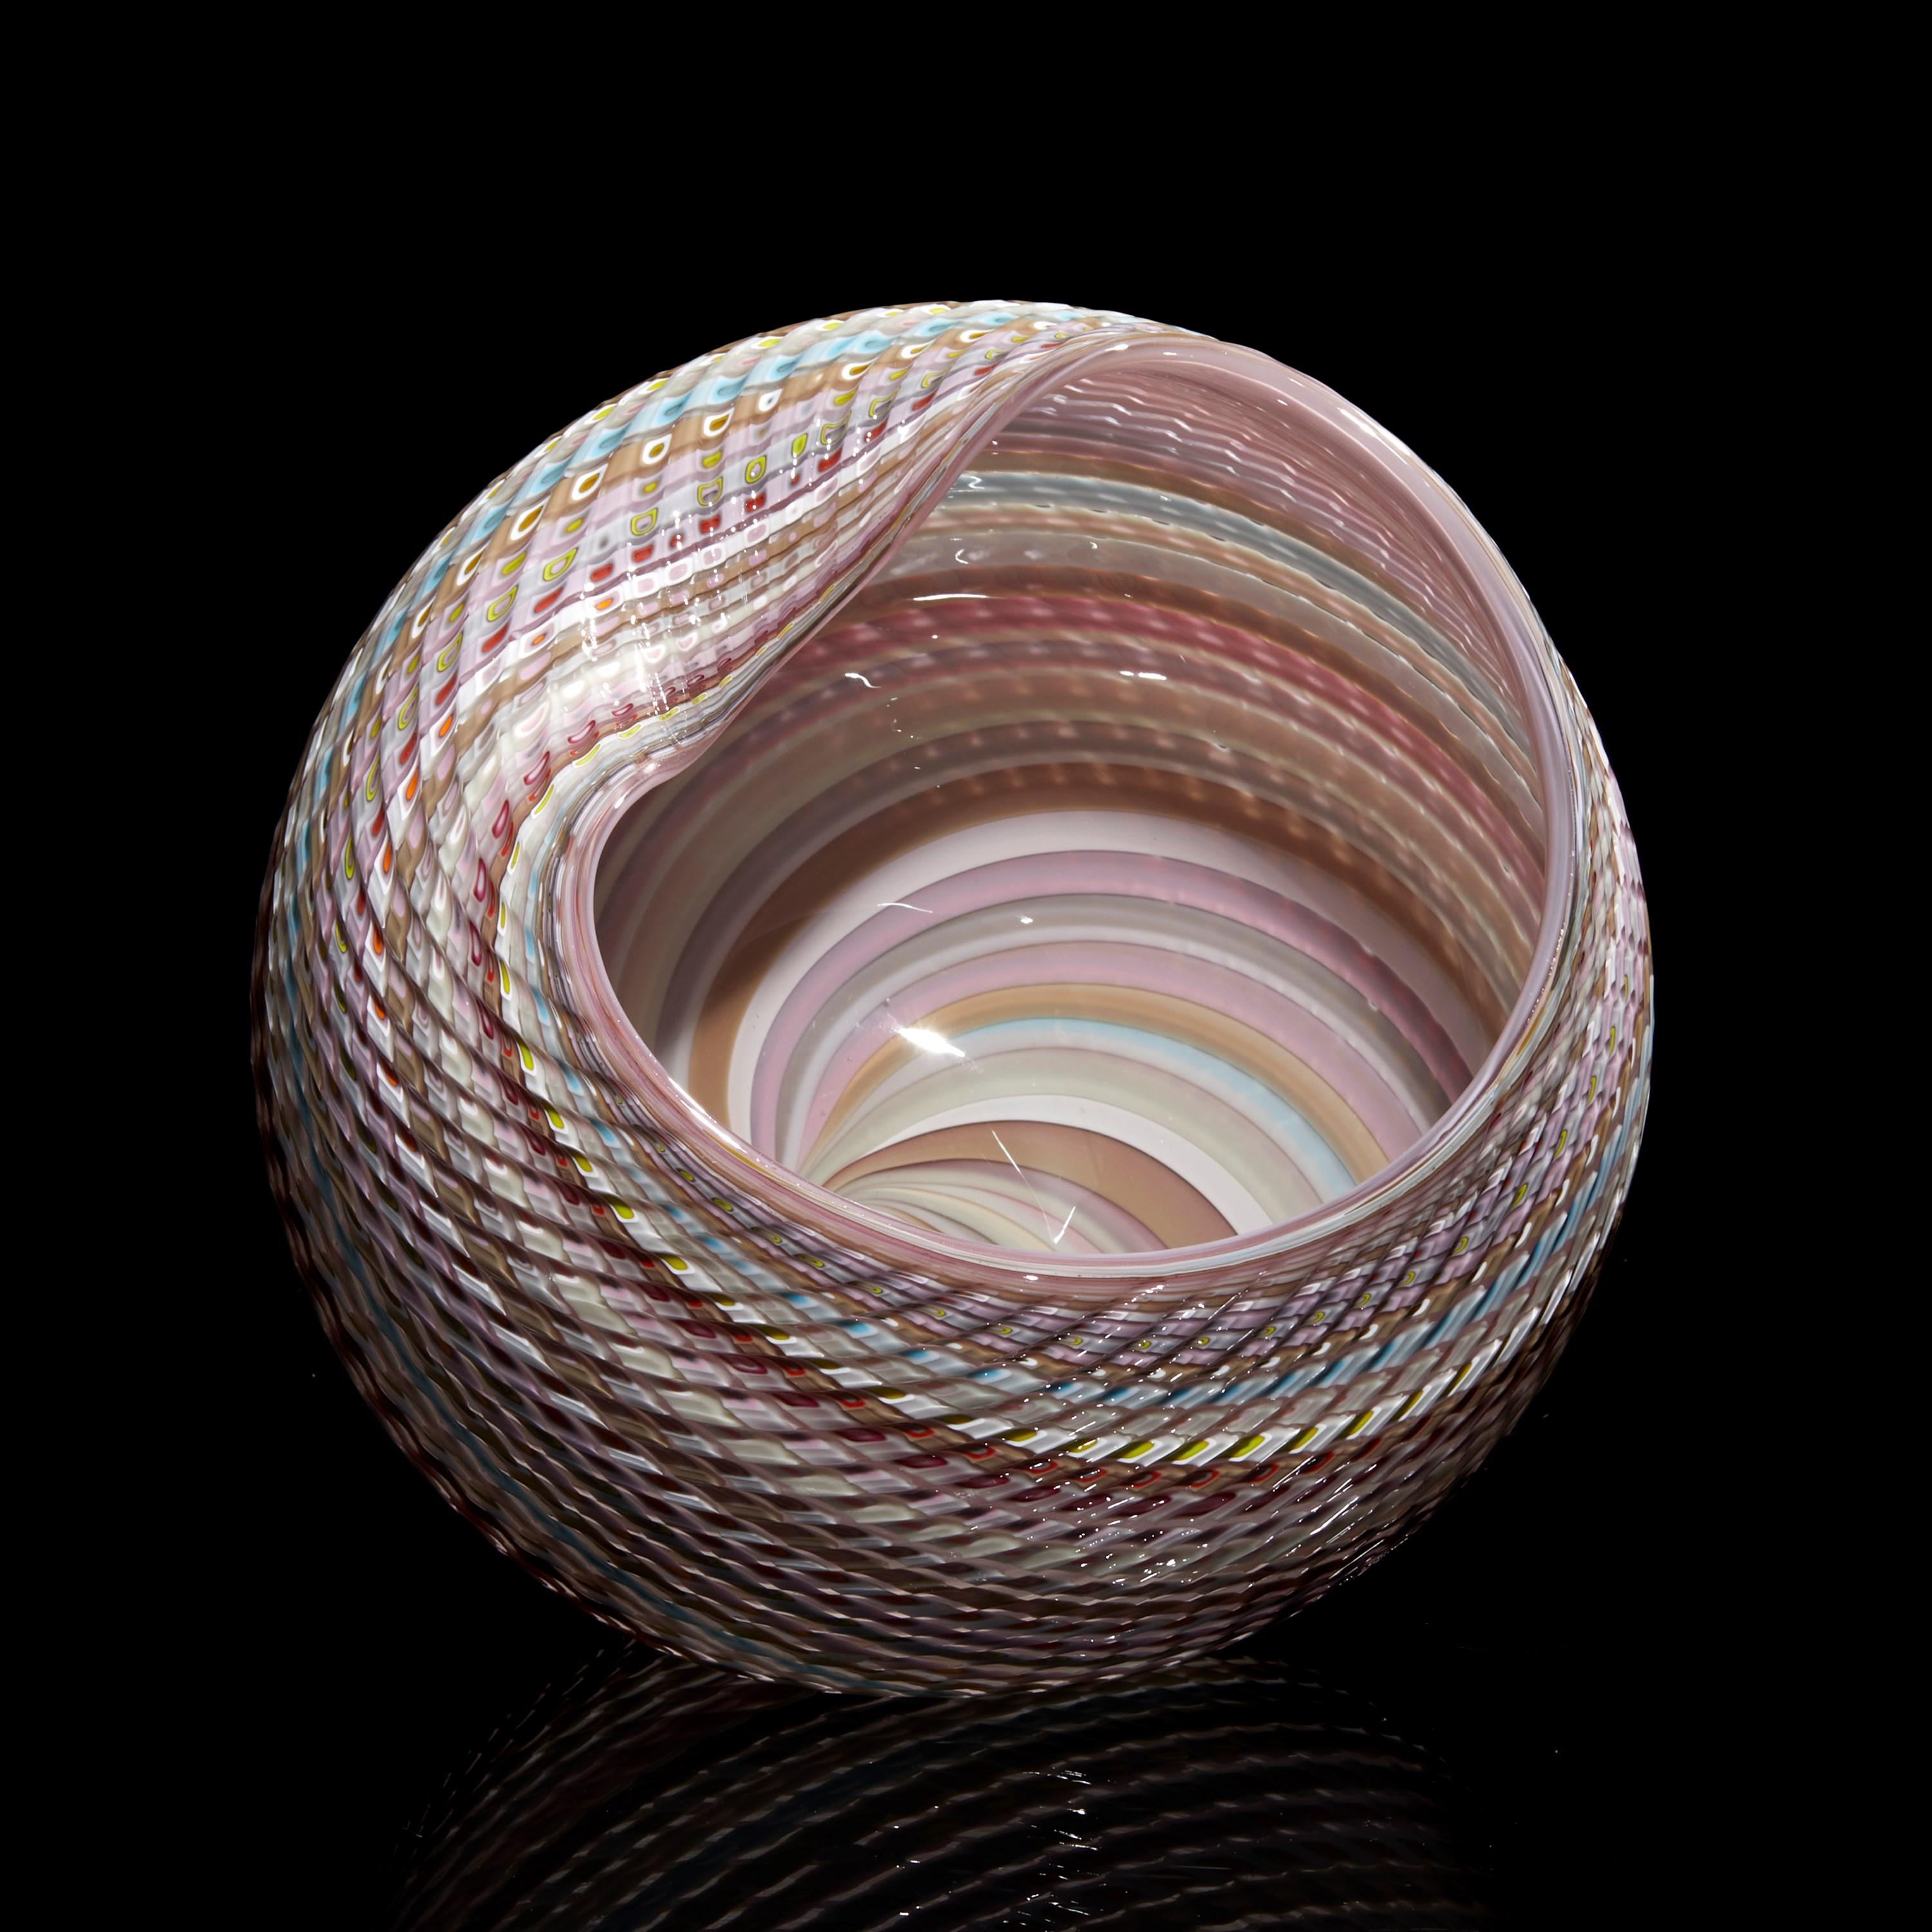 'Woven Pastel Mandala No 9 (shiny)' is a unique handblown, sculpted and cut glass sculpture by the British artist, Layne Rowe.

Rowe’s inspiration is drawn from the dramatic Devon coastline which informs his love for detail, a constant theme for